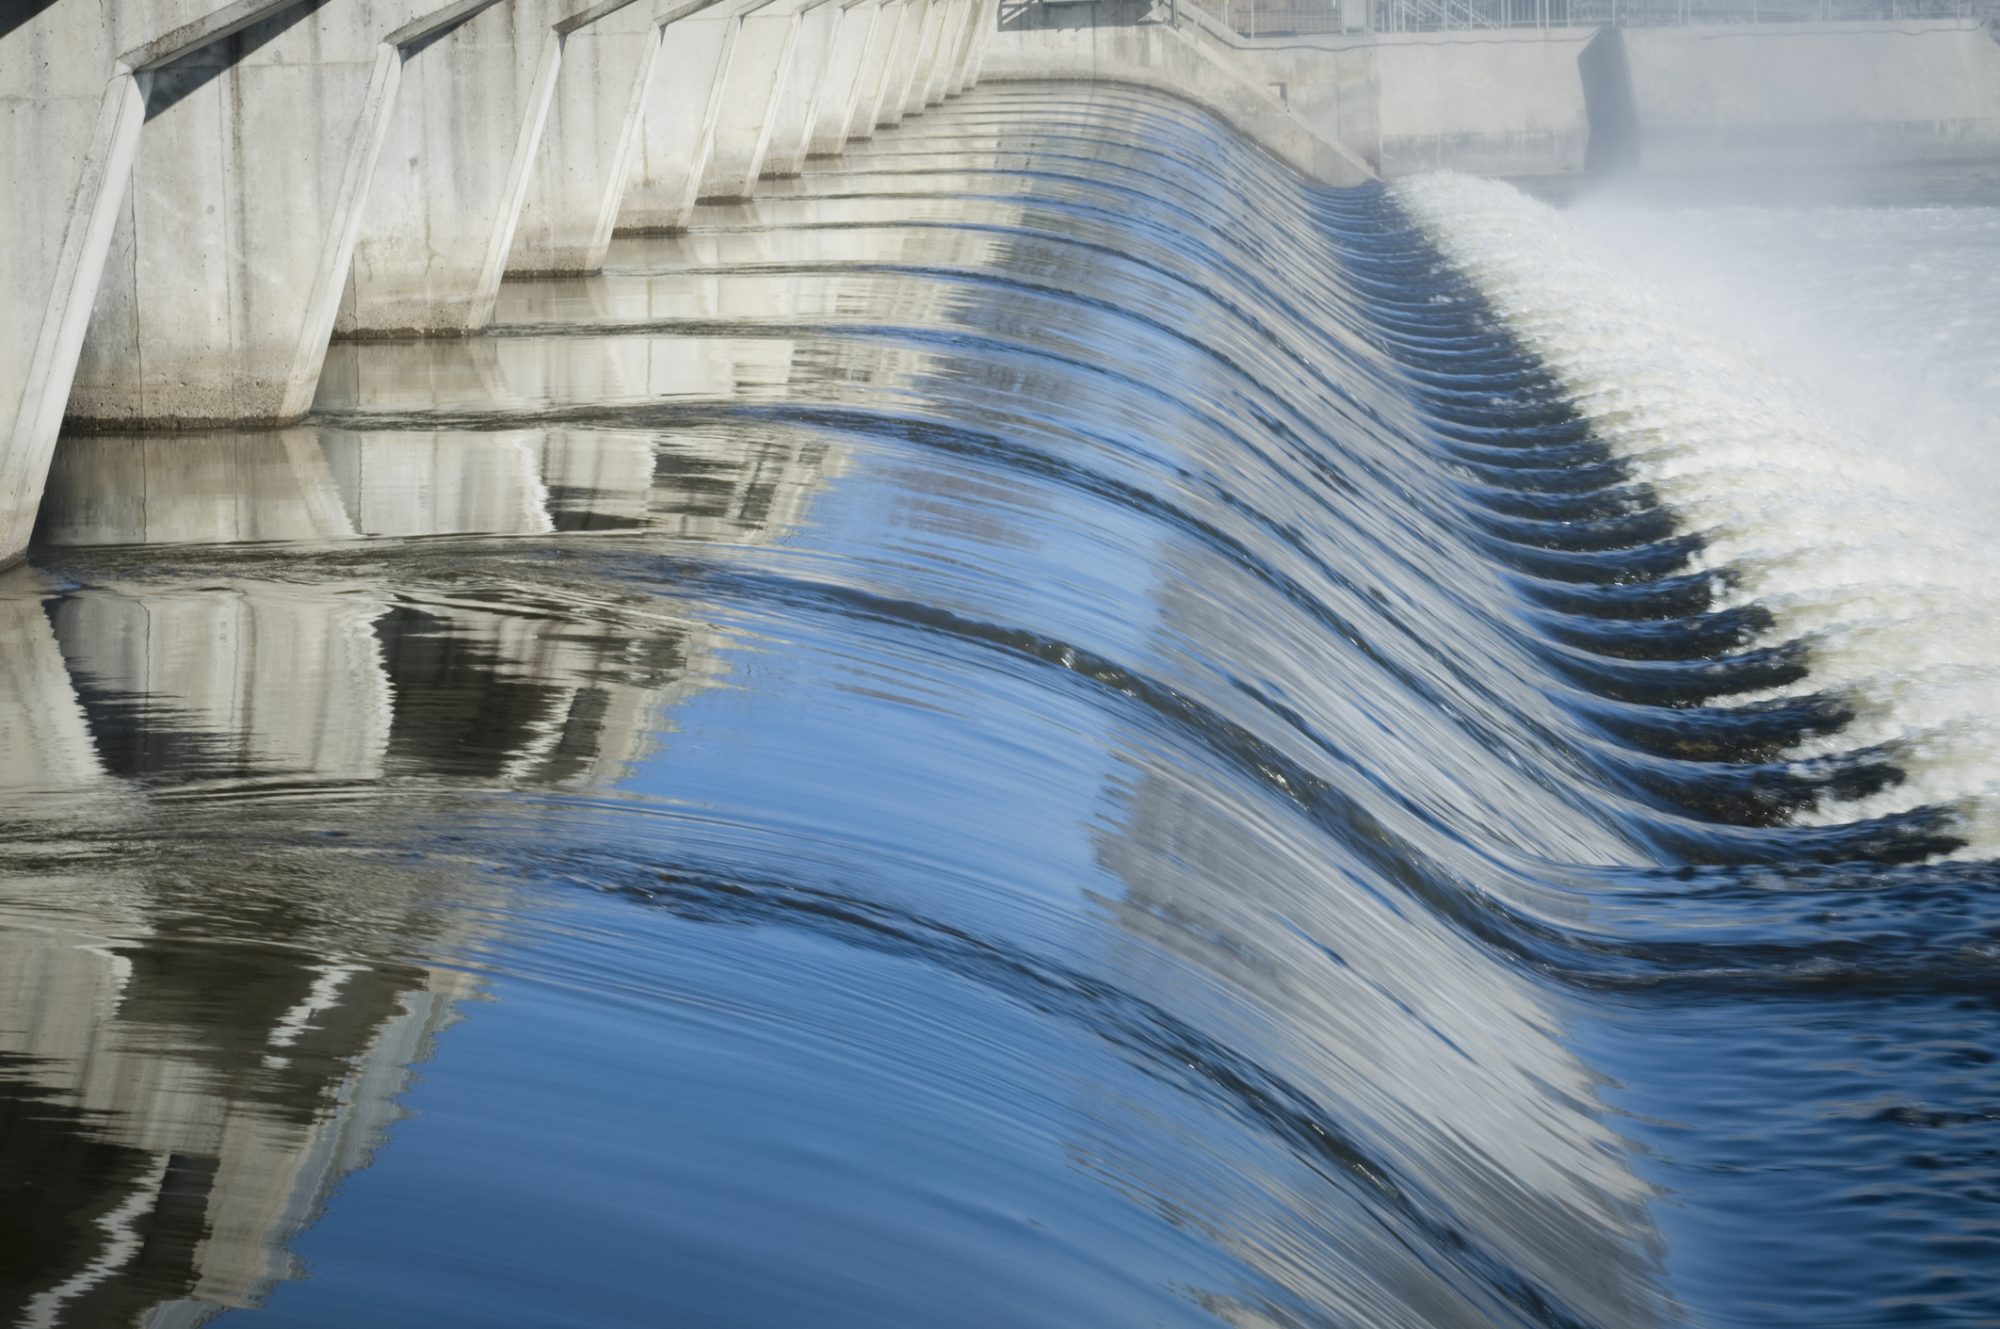 A view of hydropower in action - clean energy is a key industry of the Pittsburgh region 